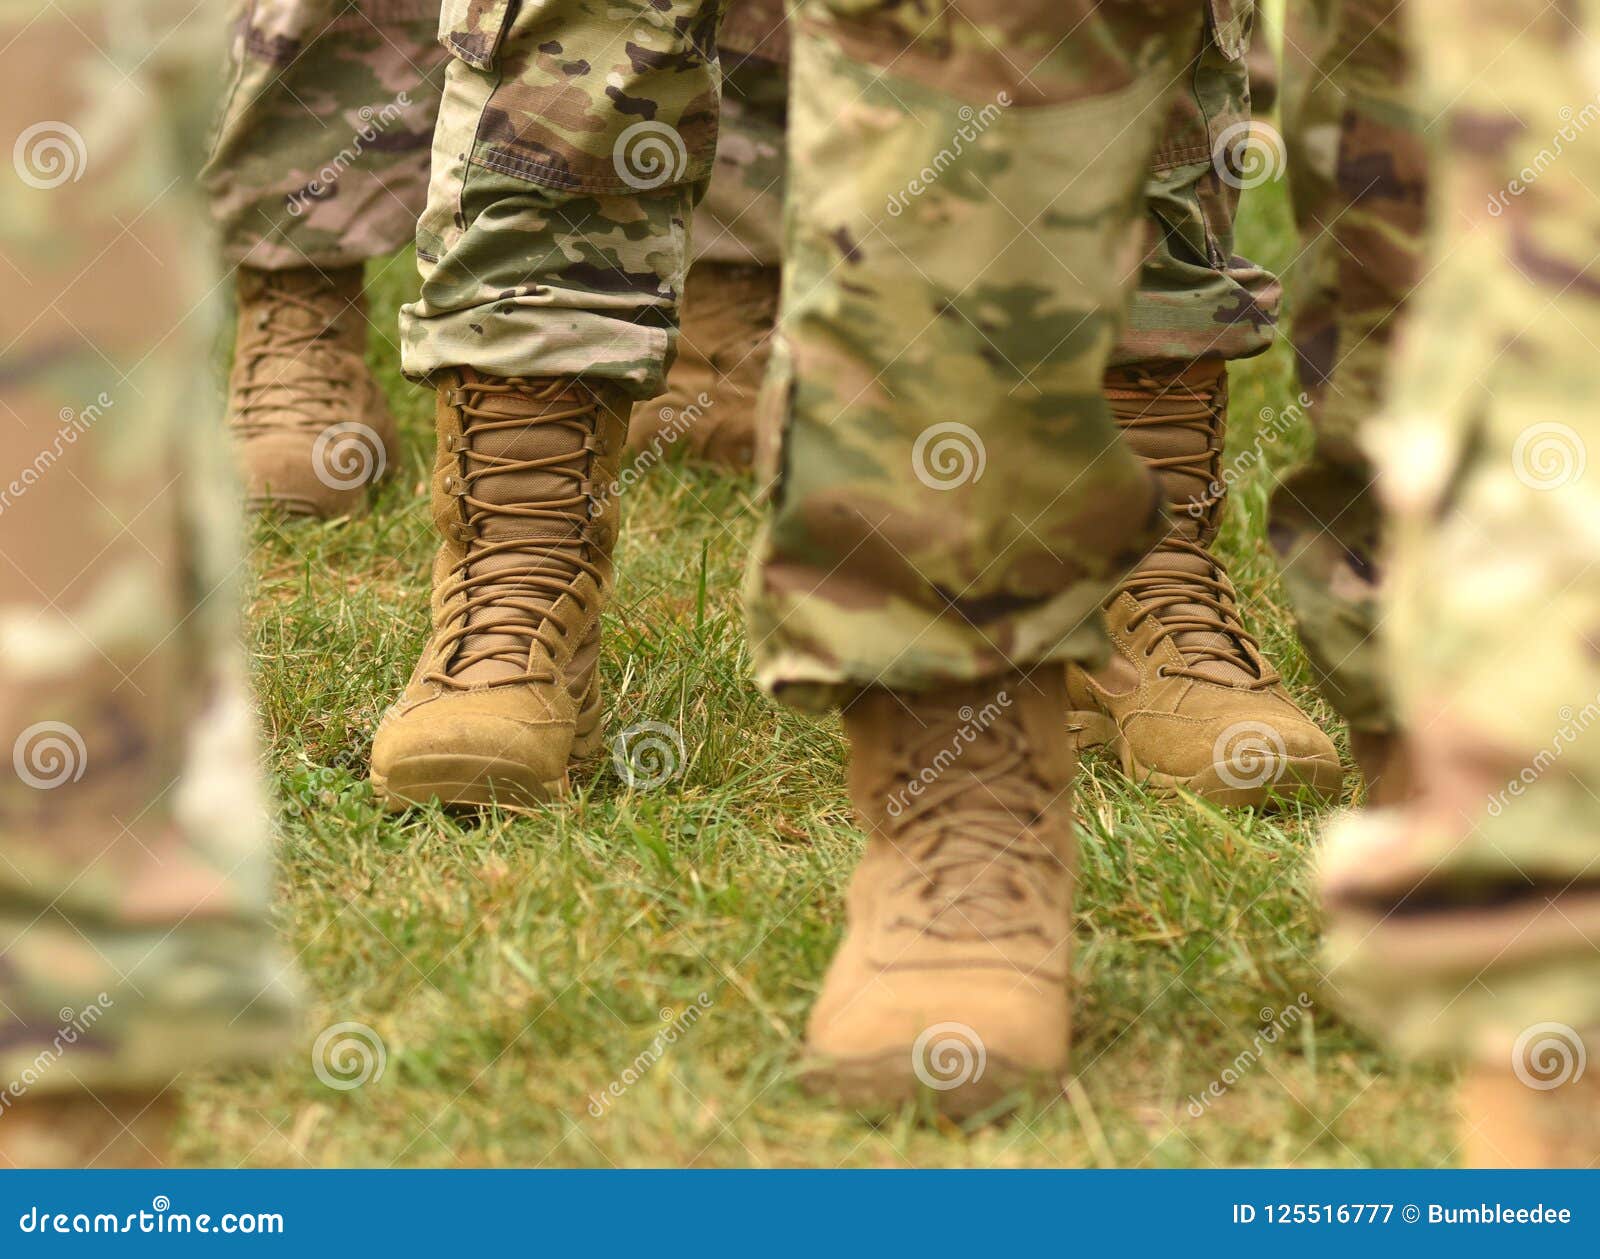 us soldiers legs in green camouflage military uniform. us troops